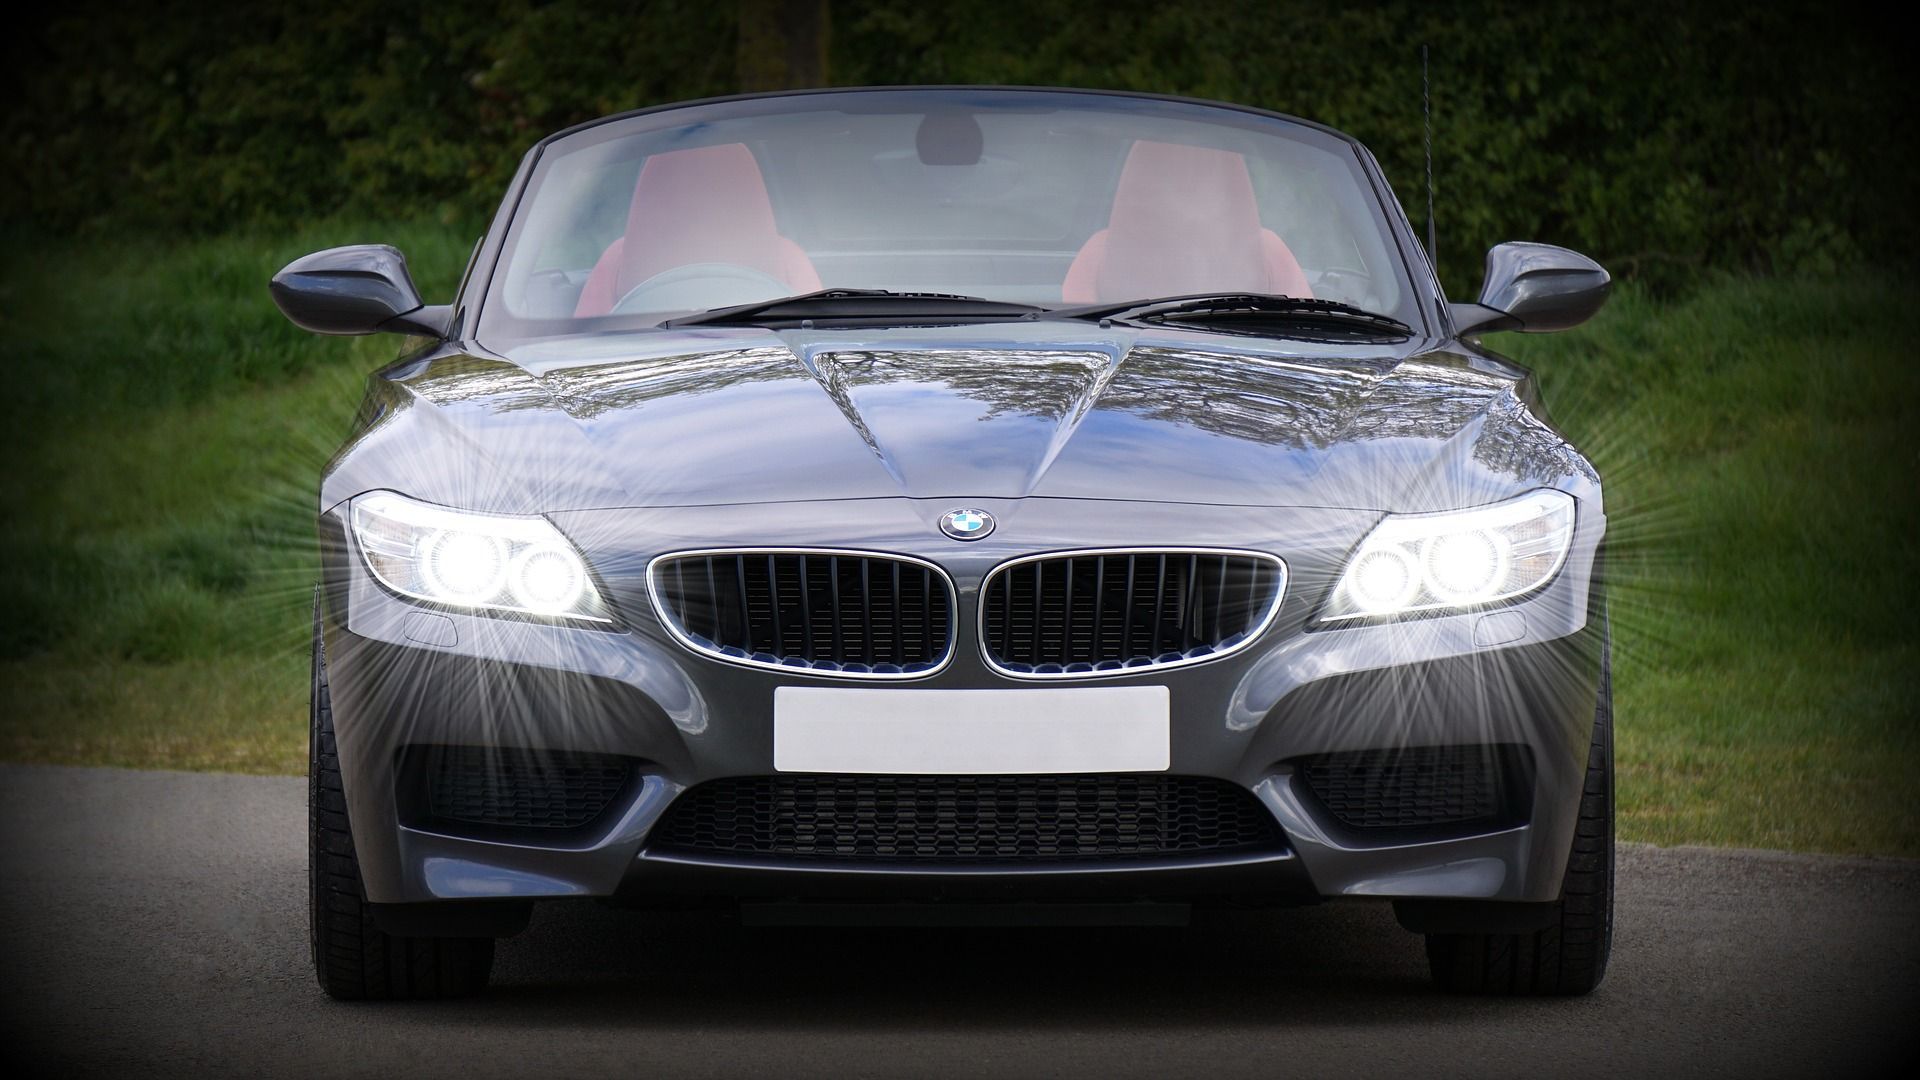 The front of a bmw z4 is parked on the side of the road.